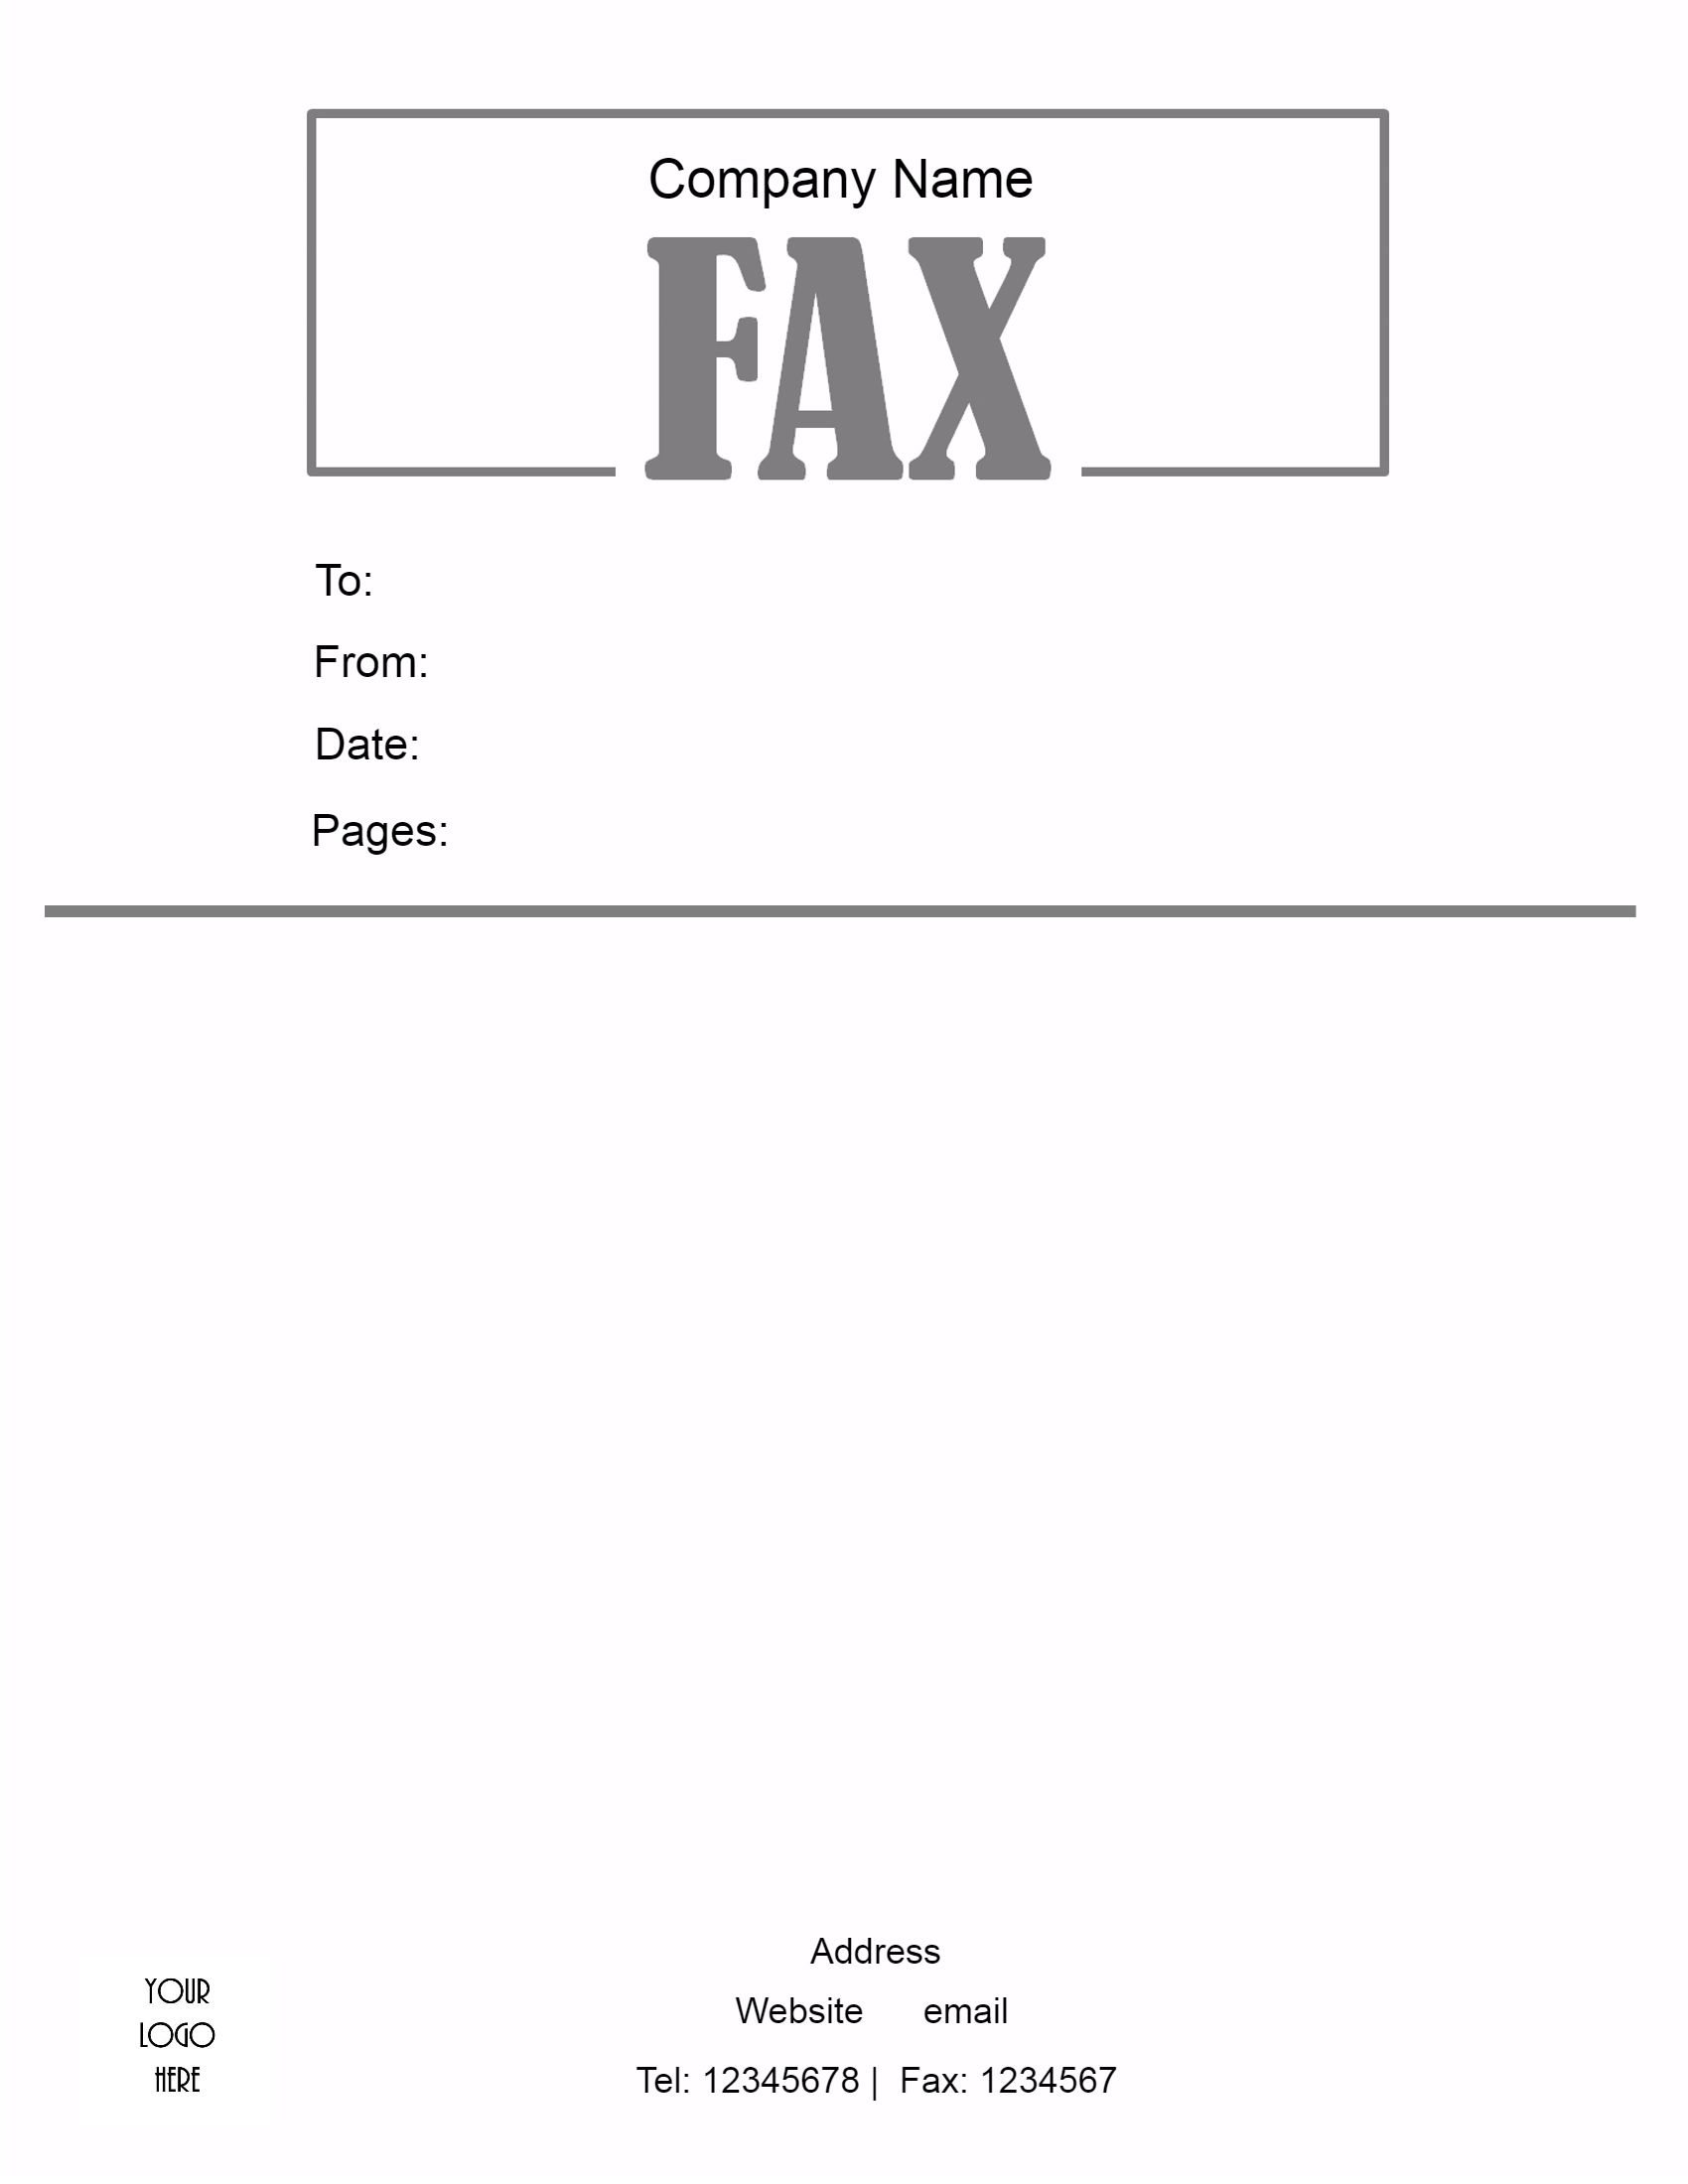 attention to fax cover sheet